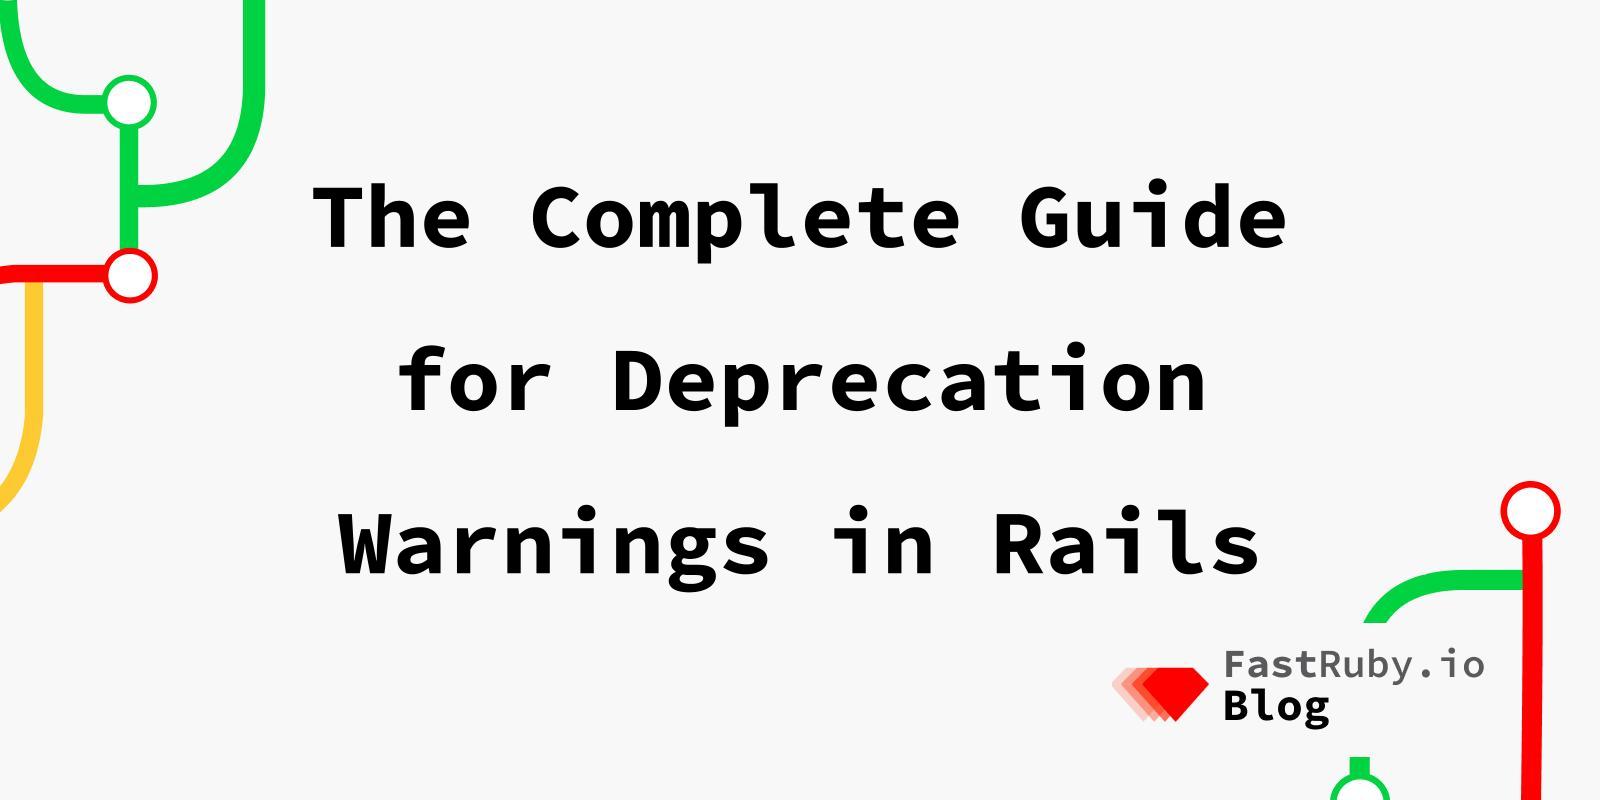 The Complete Guide for Deprecation Warnings in Rails